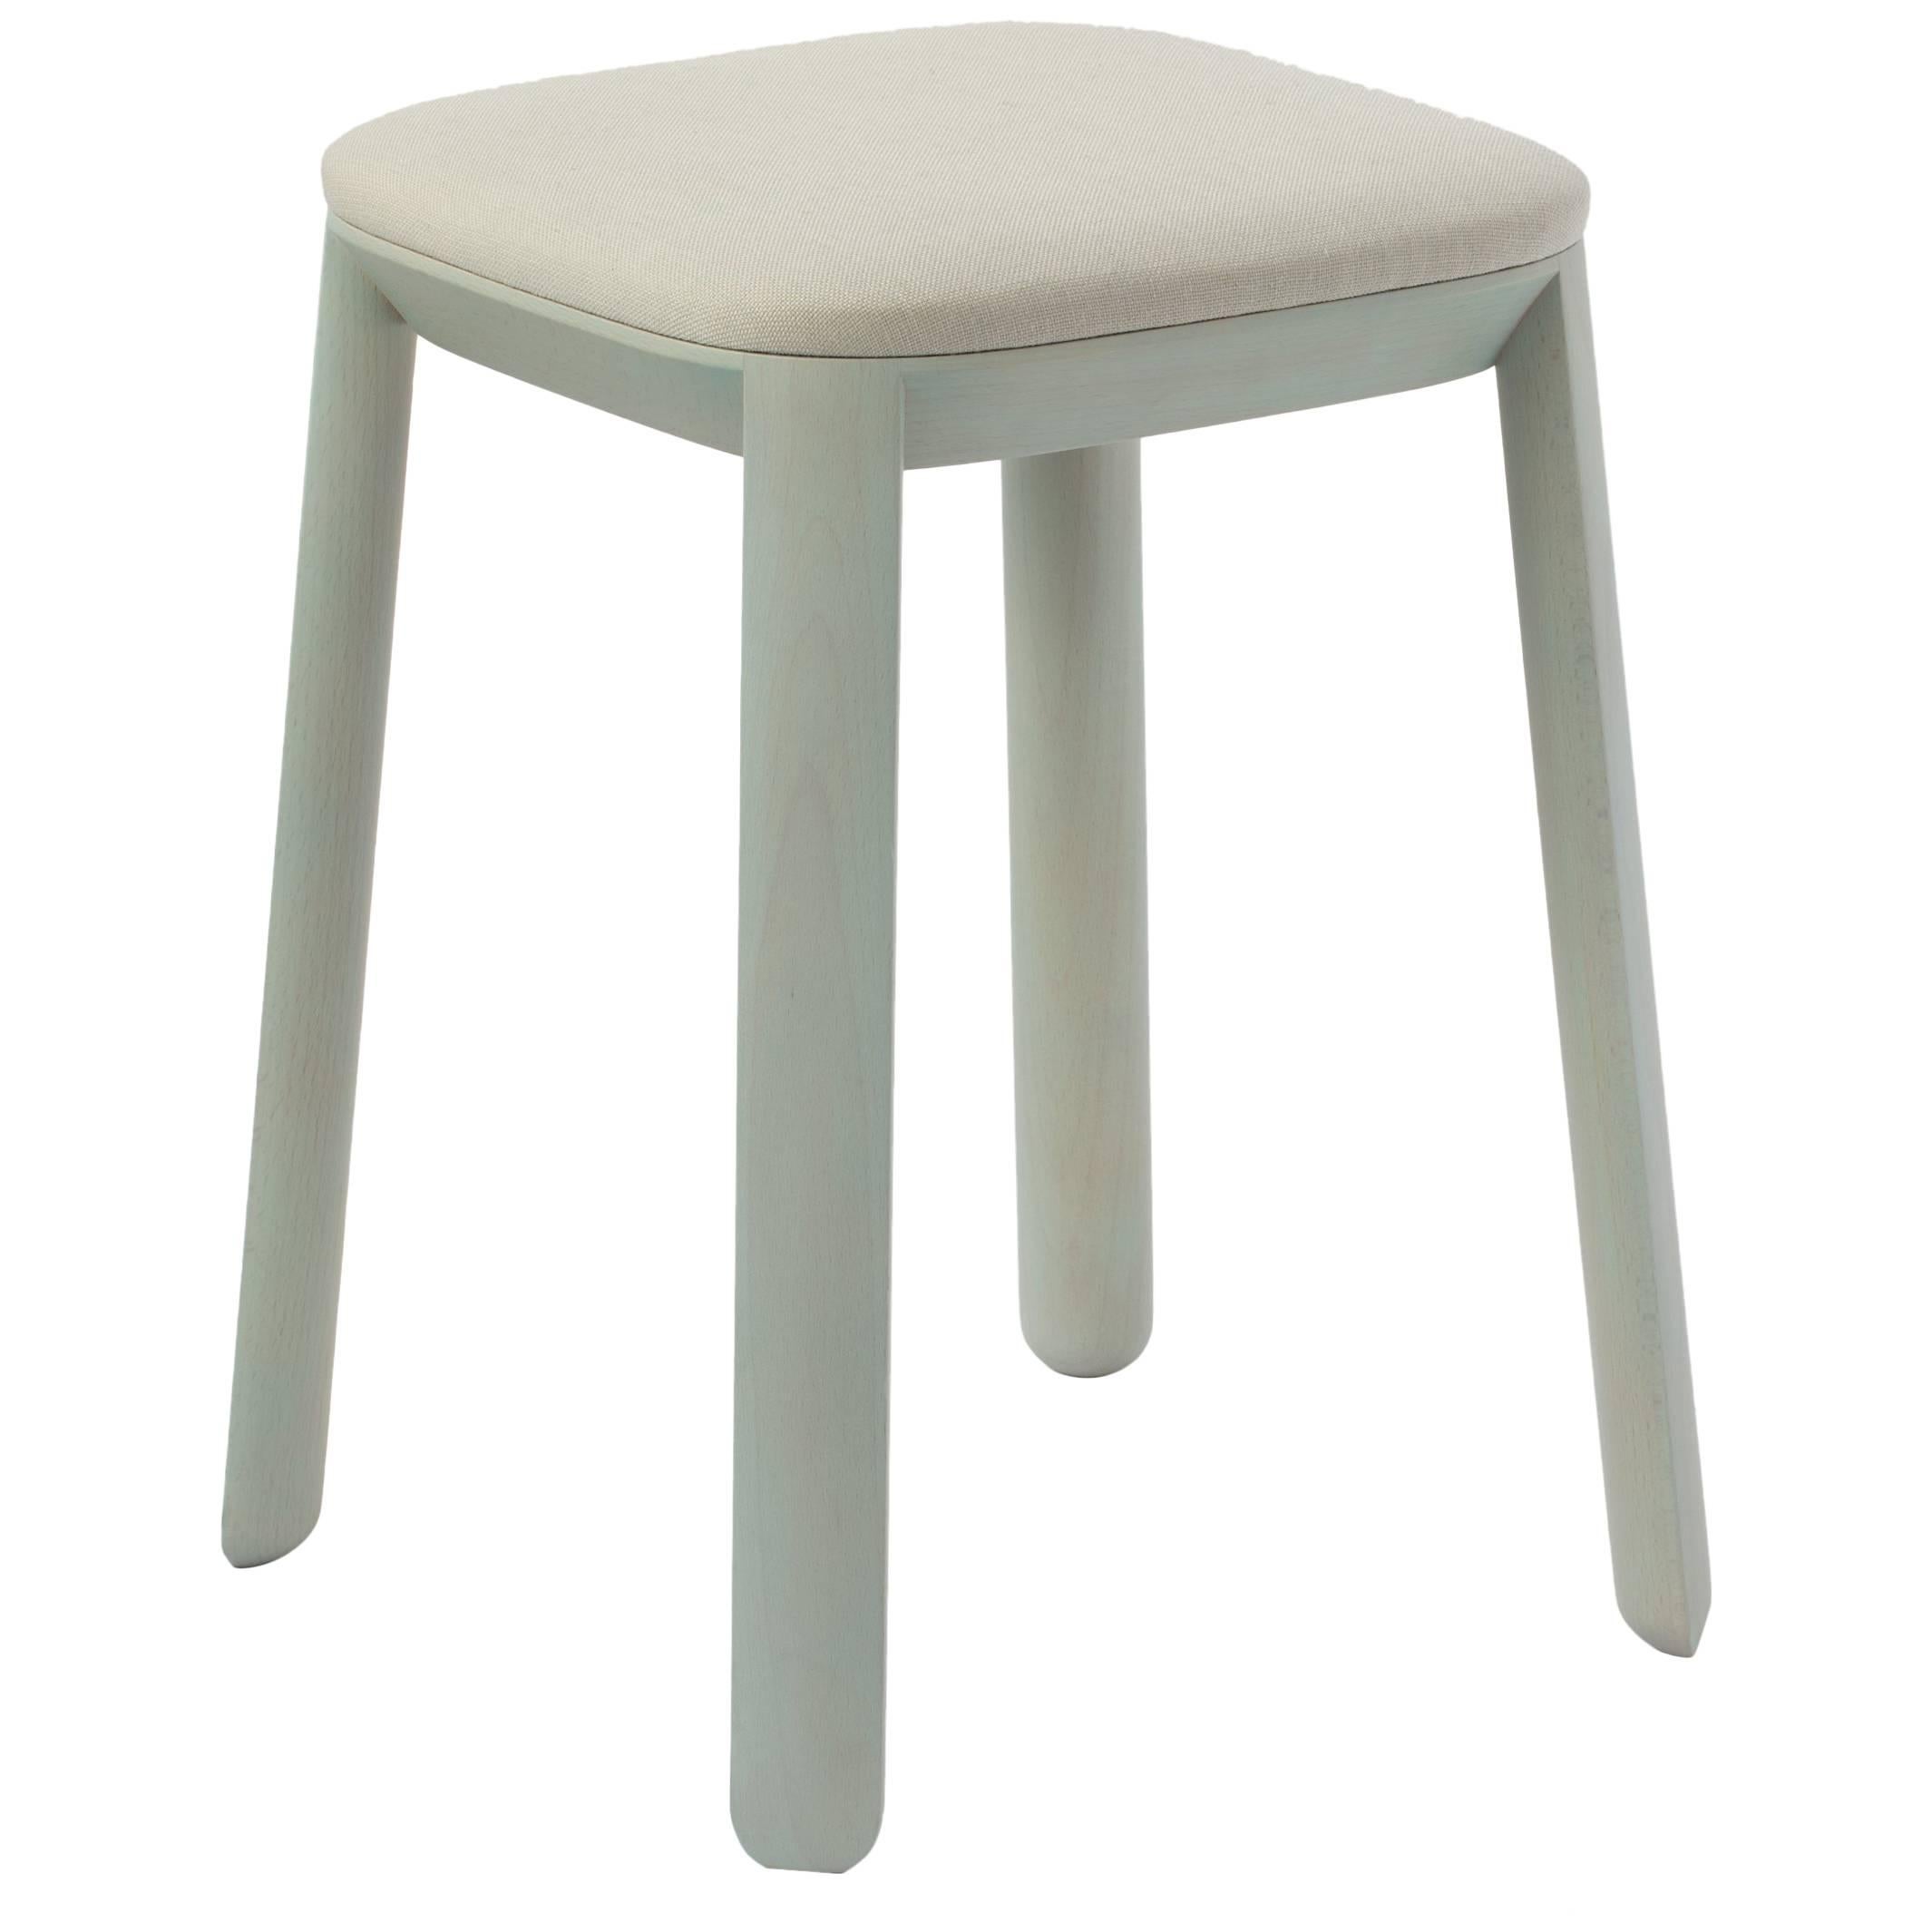 Maharam Covered Stool by Scholten & Baijings 